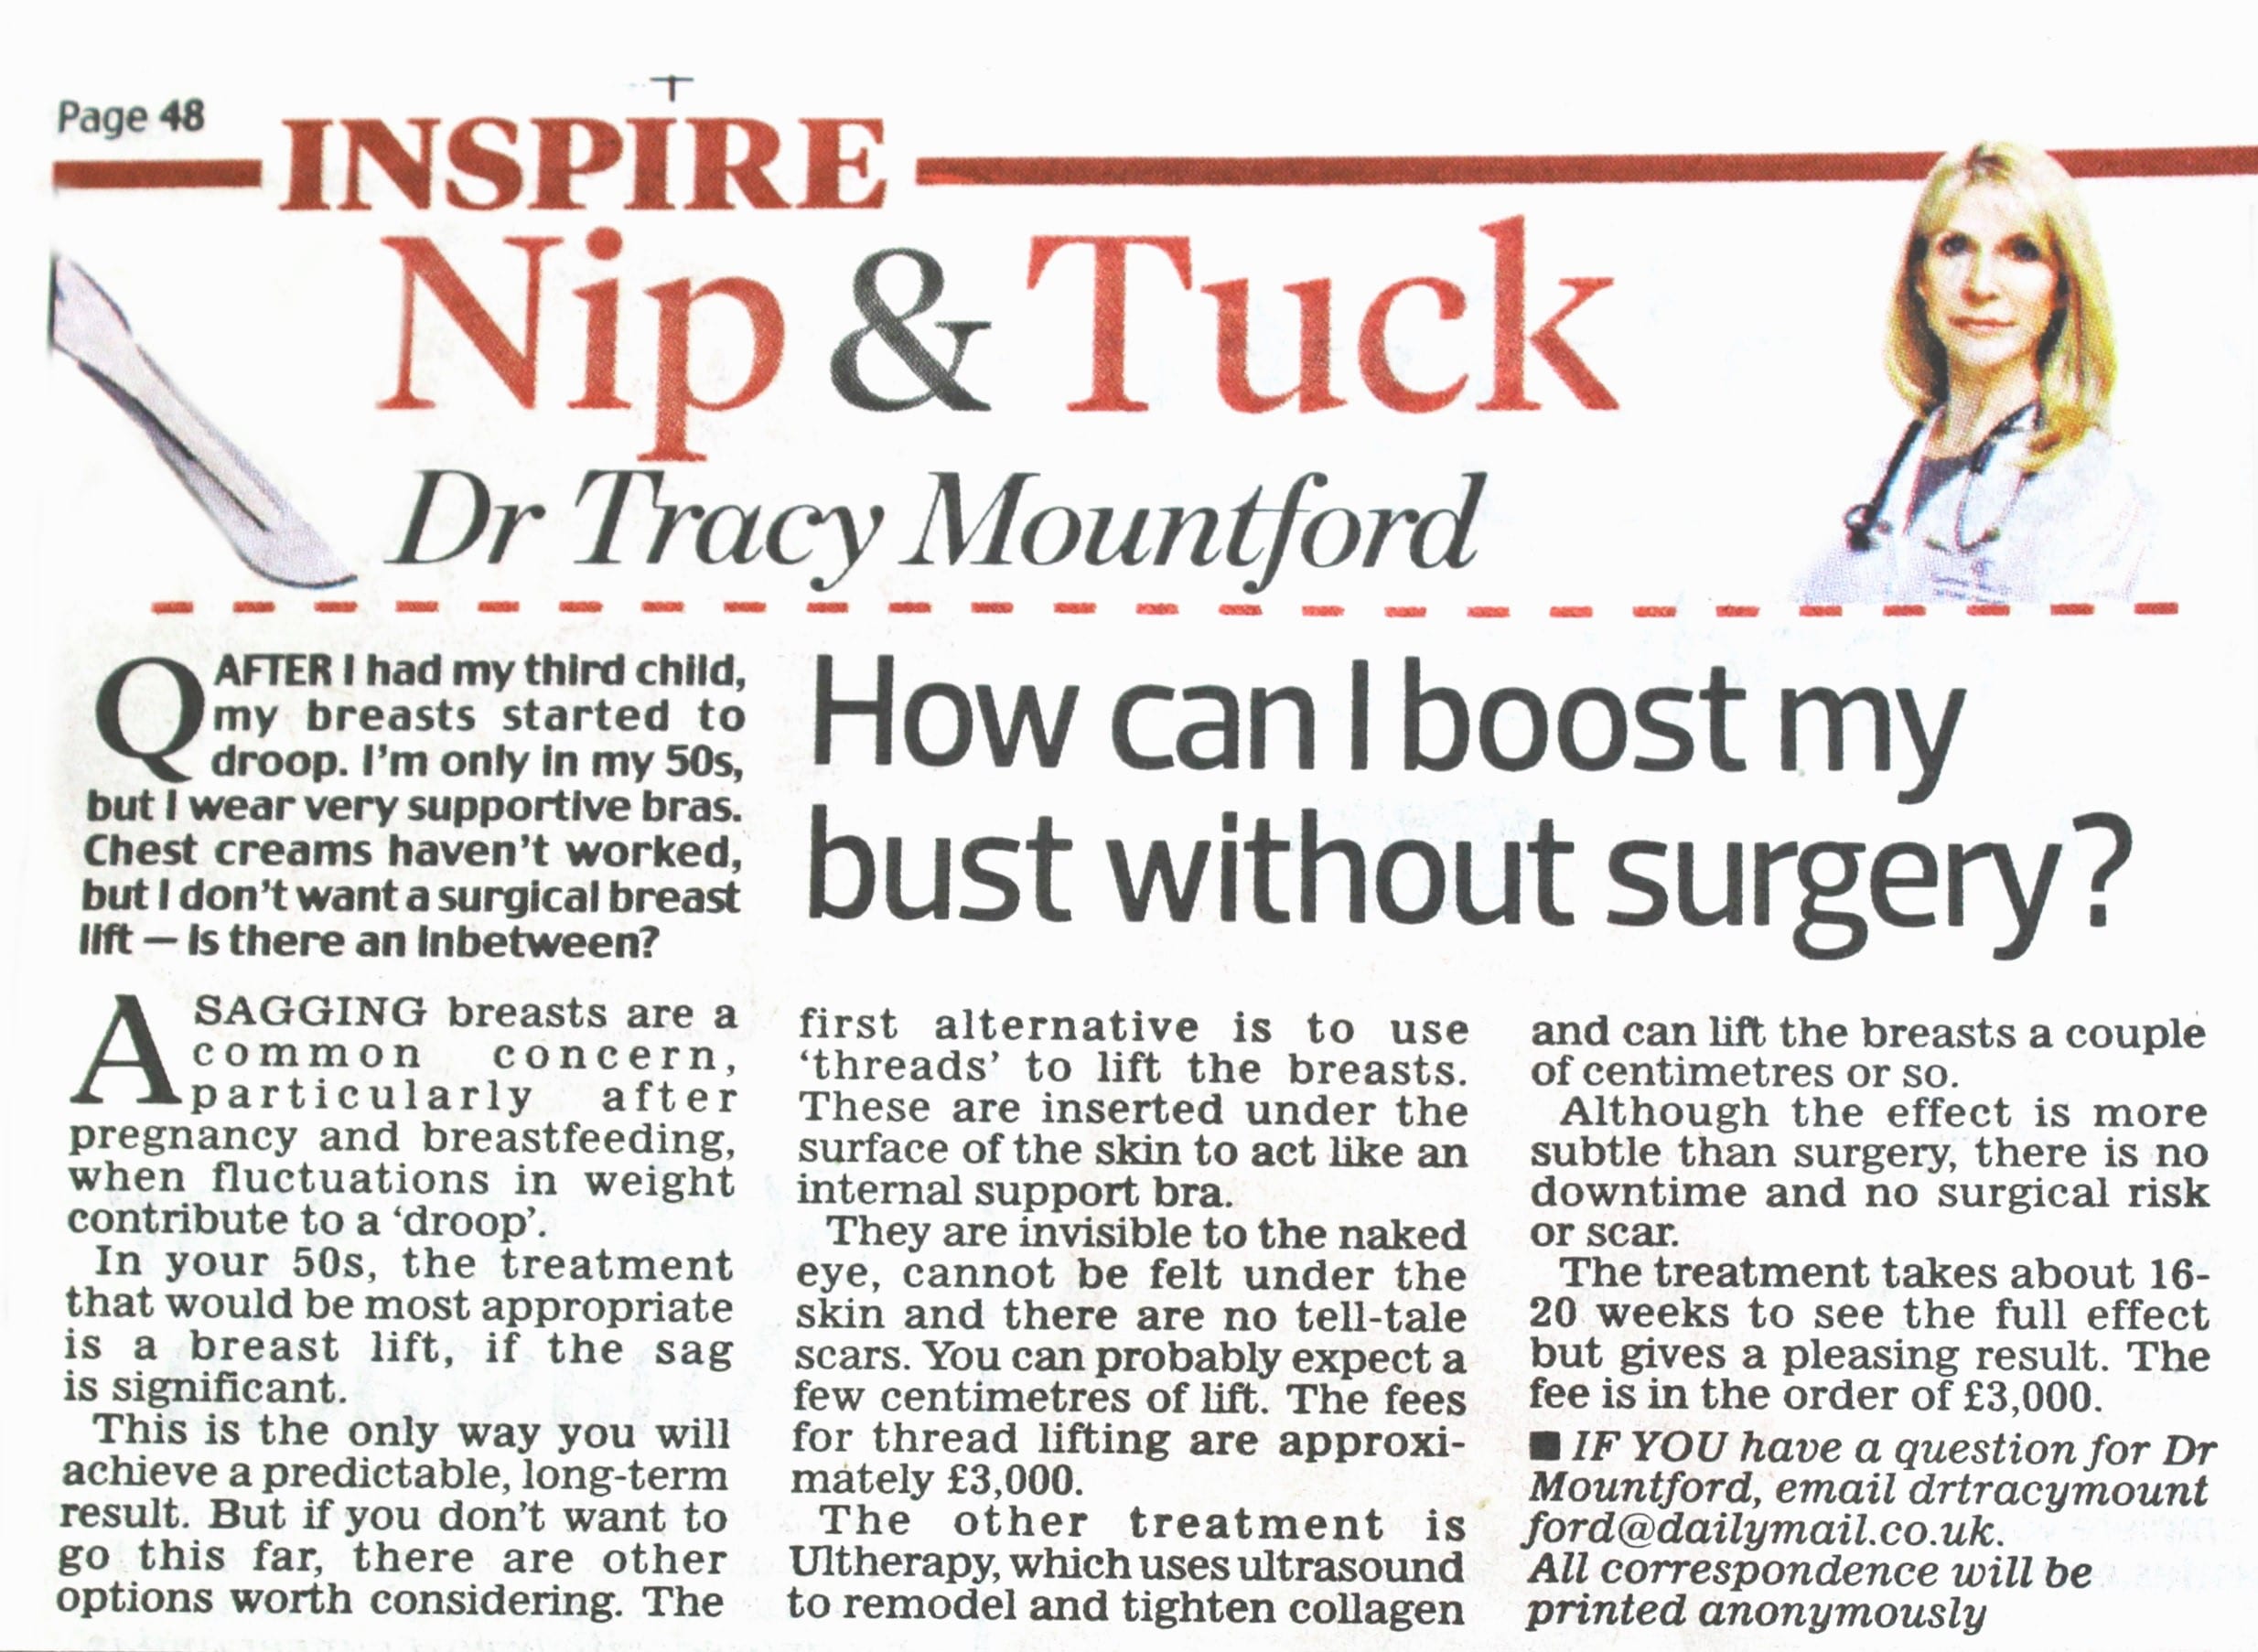 dail-mail-nip-and-tuck-10-October-2016-dr-tracy-mountford-non-surgical cosmetic treatments